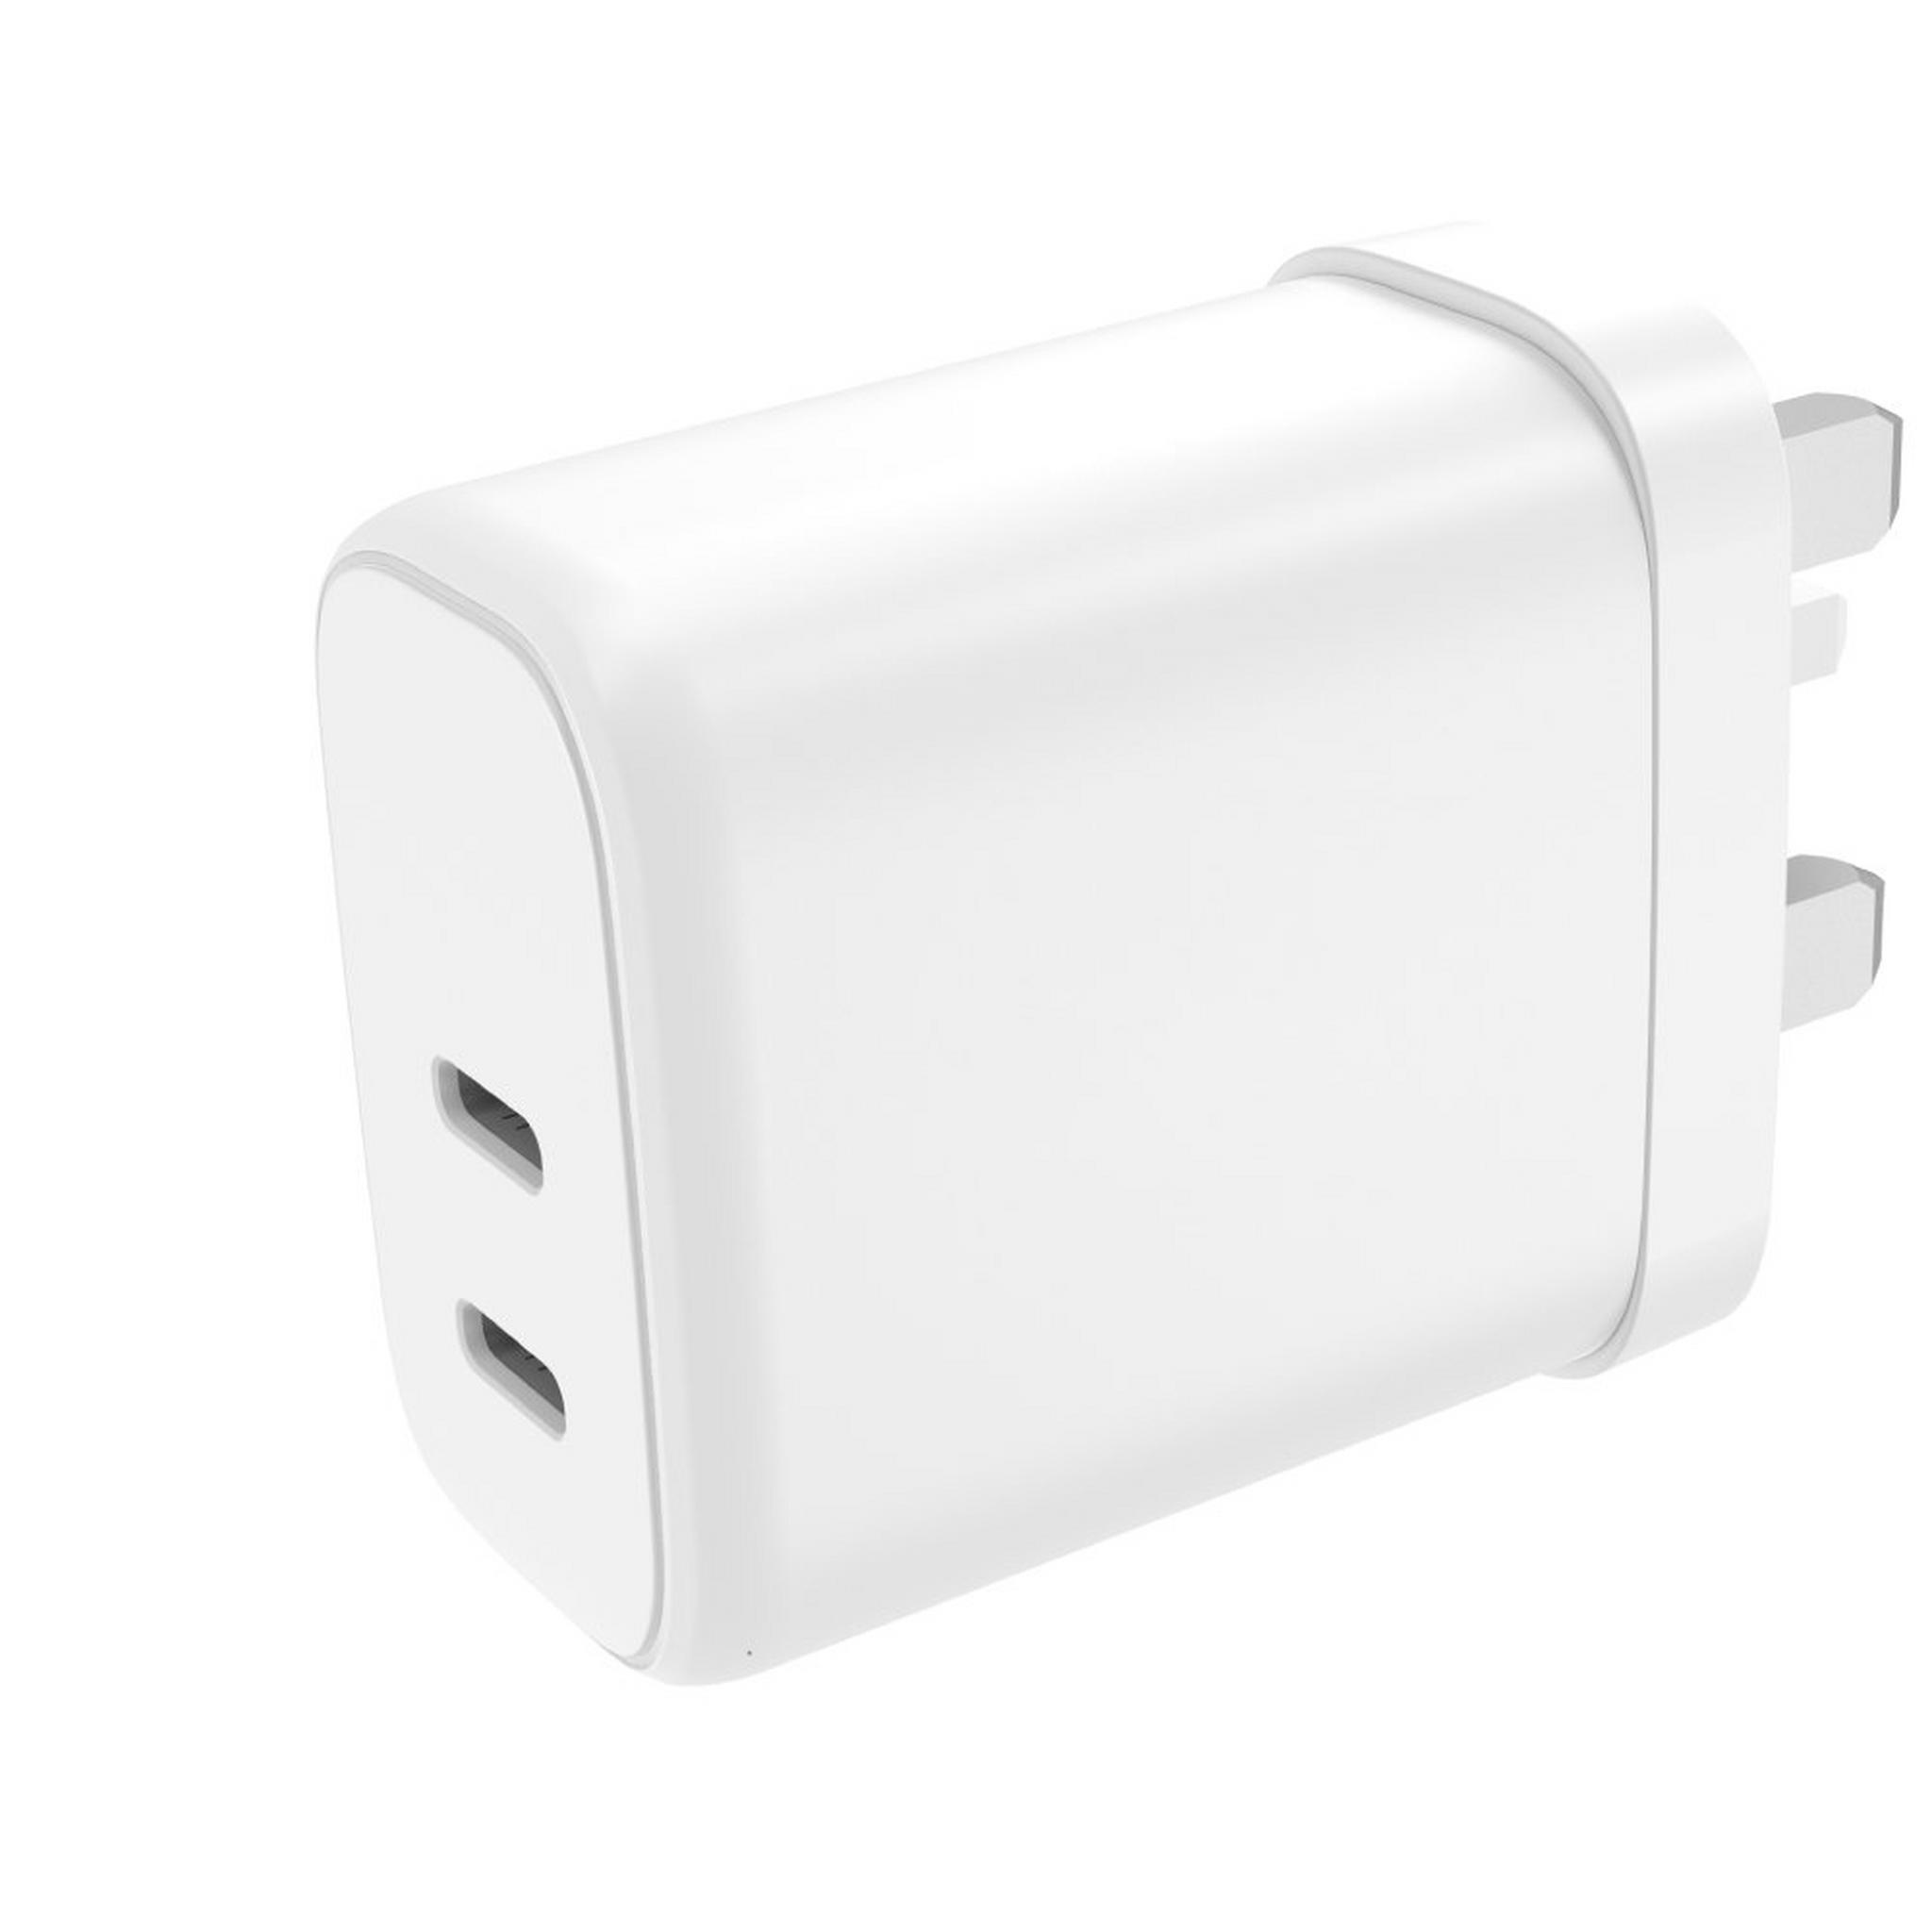 EQ Gan 65W Power Delivery Wall Charger, 2 USB Type C Ports, VTX-65VHCC-3 – White